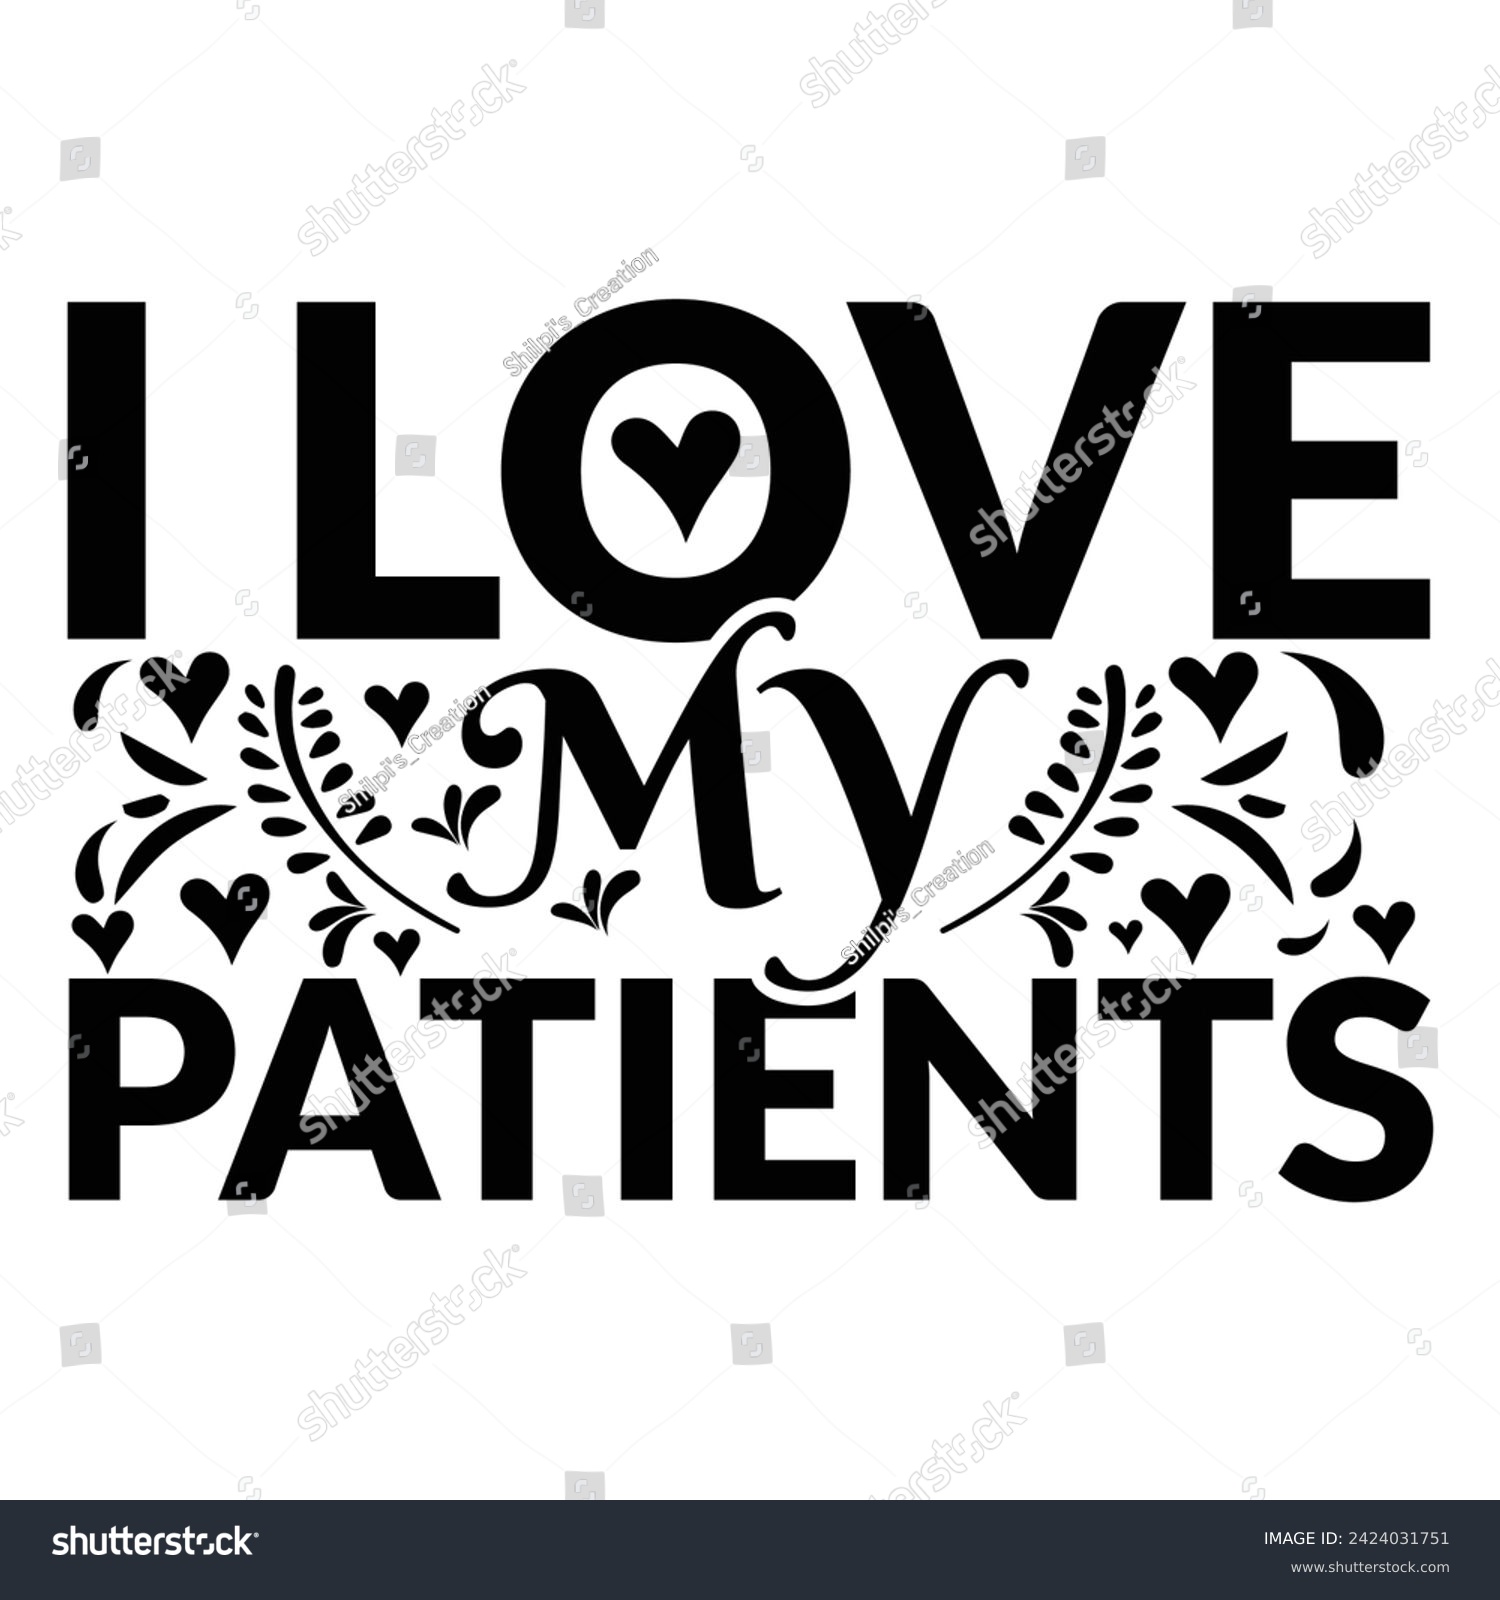 SVG of I love my patients ,I love my patients - Nurse T-Shirt Design, Hand drawn vintage illustration with lettering and decoration elements, used for prints on bags, poster, banner, pillows. svg